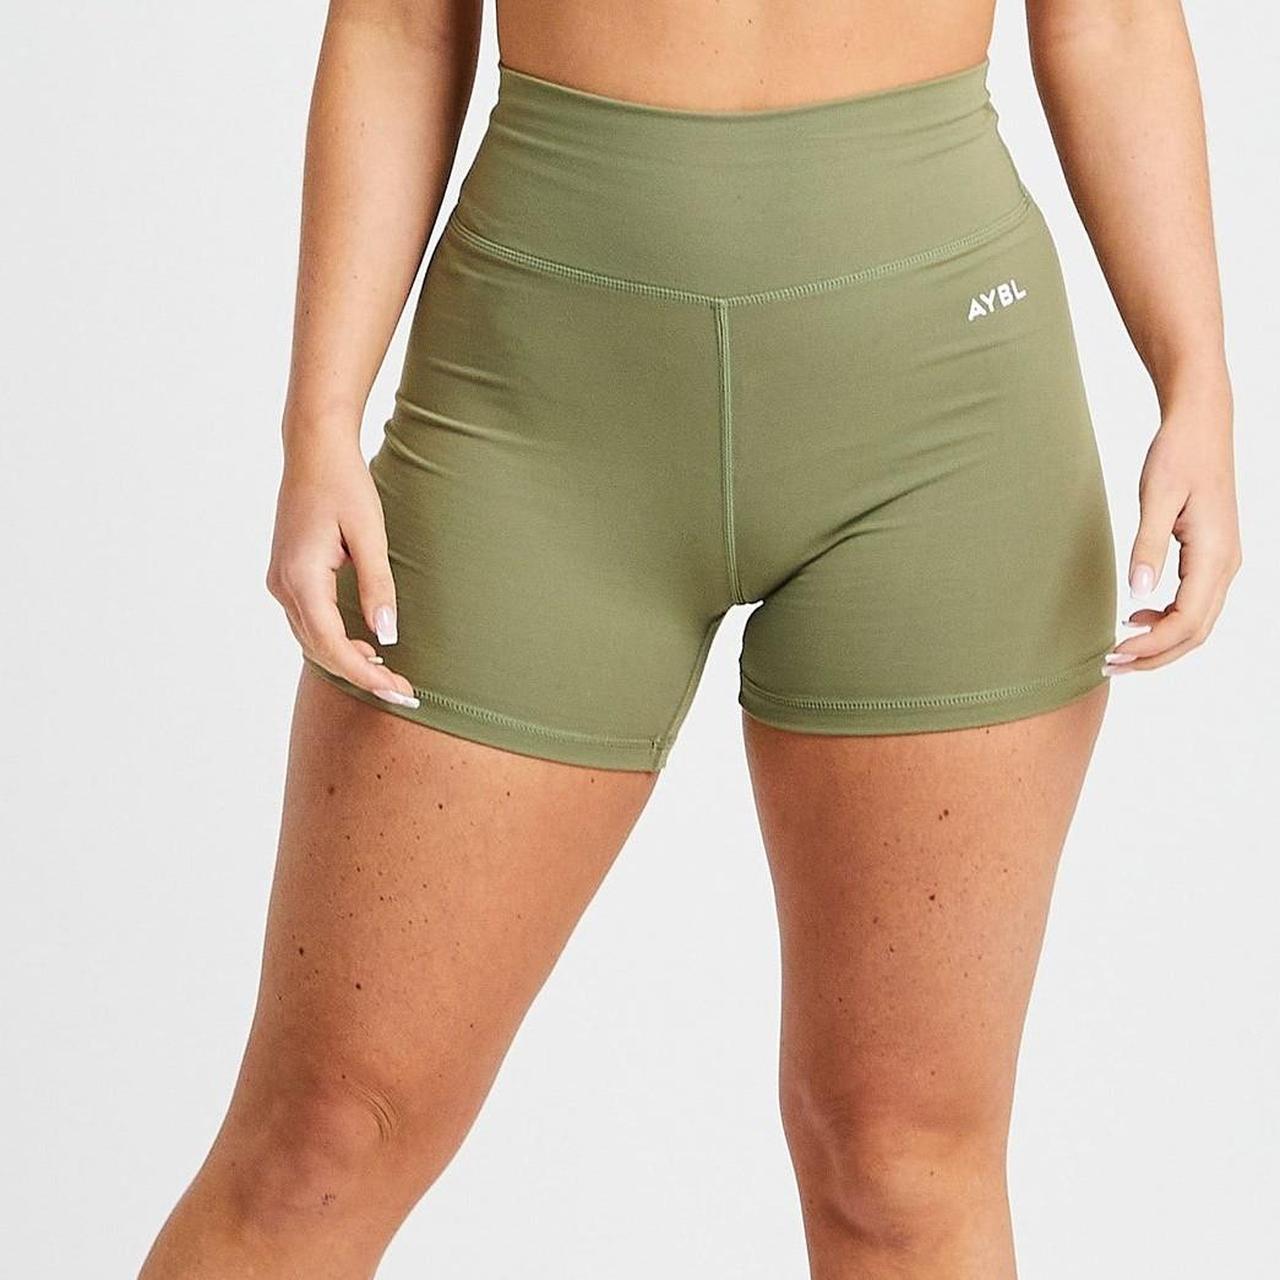 AYBL Core Shorts Olive  Women's Small New without - Depop